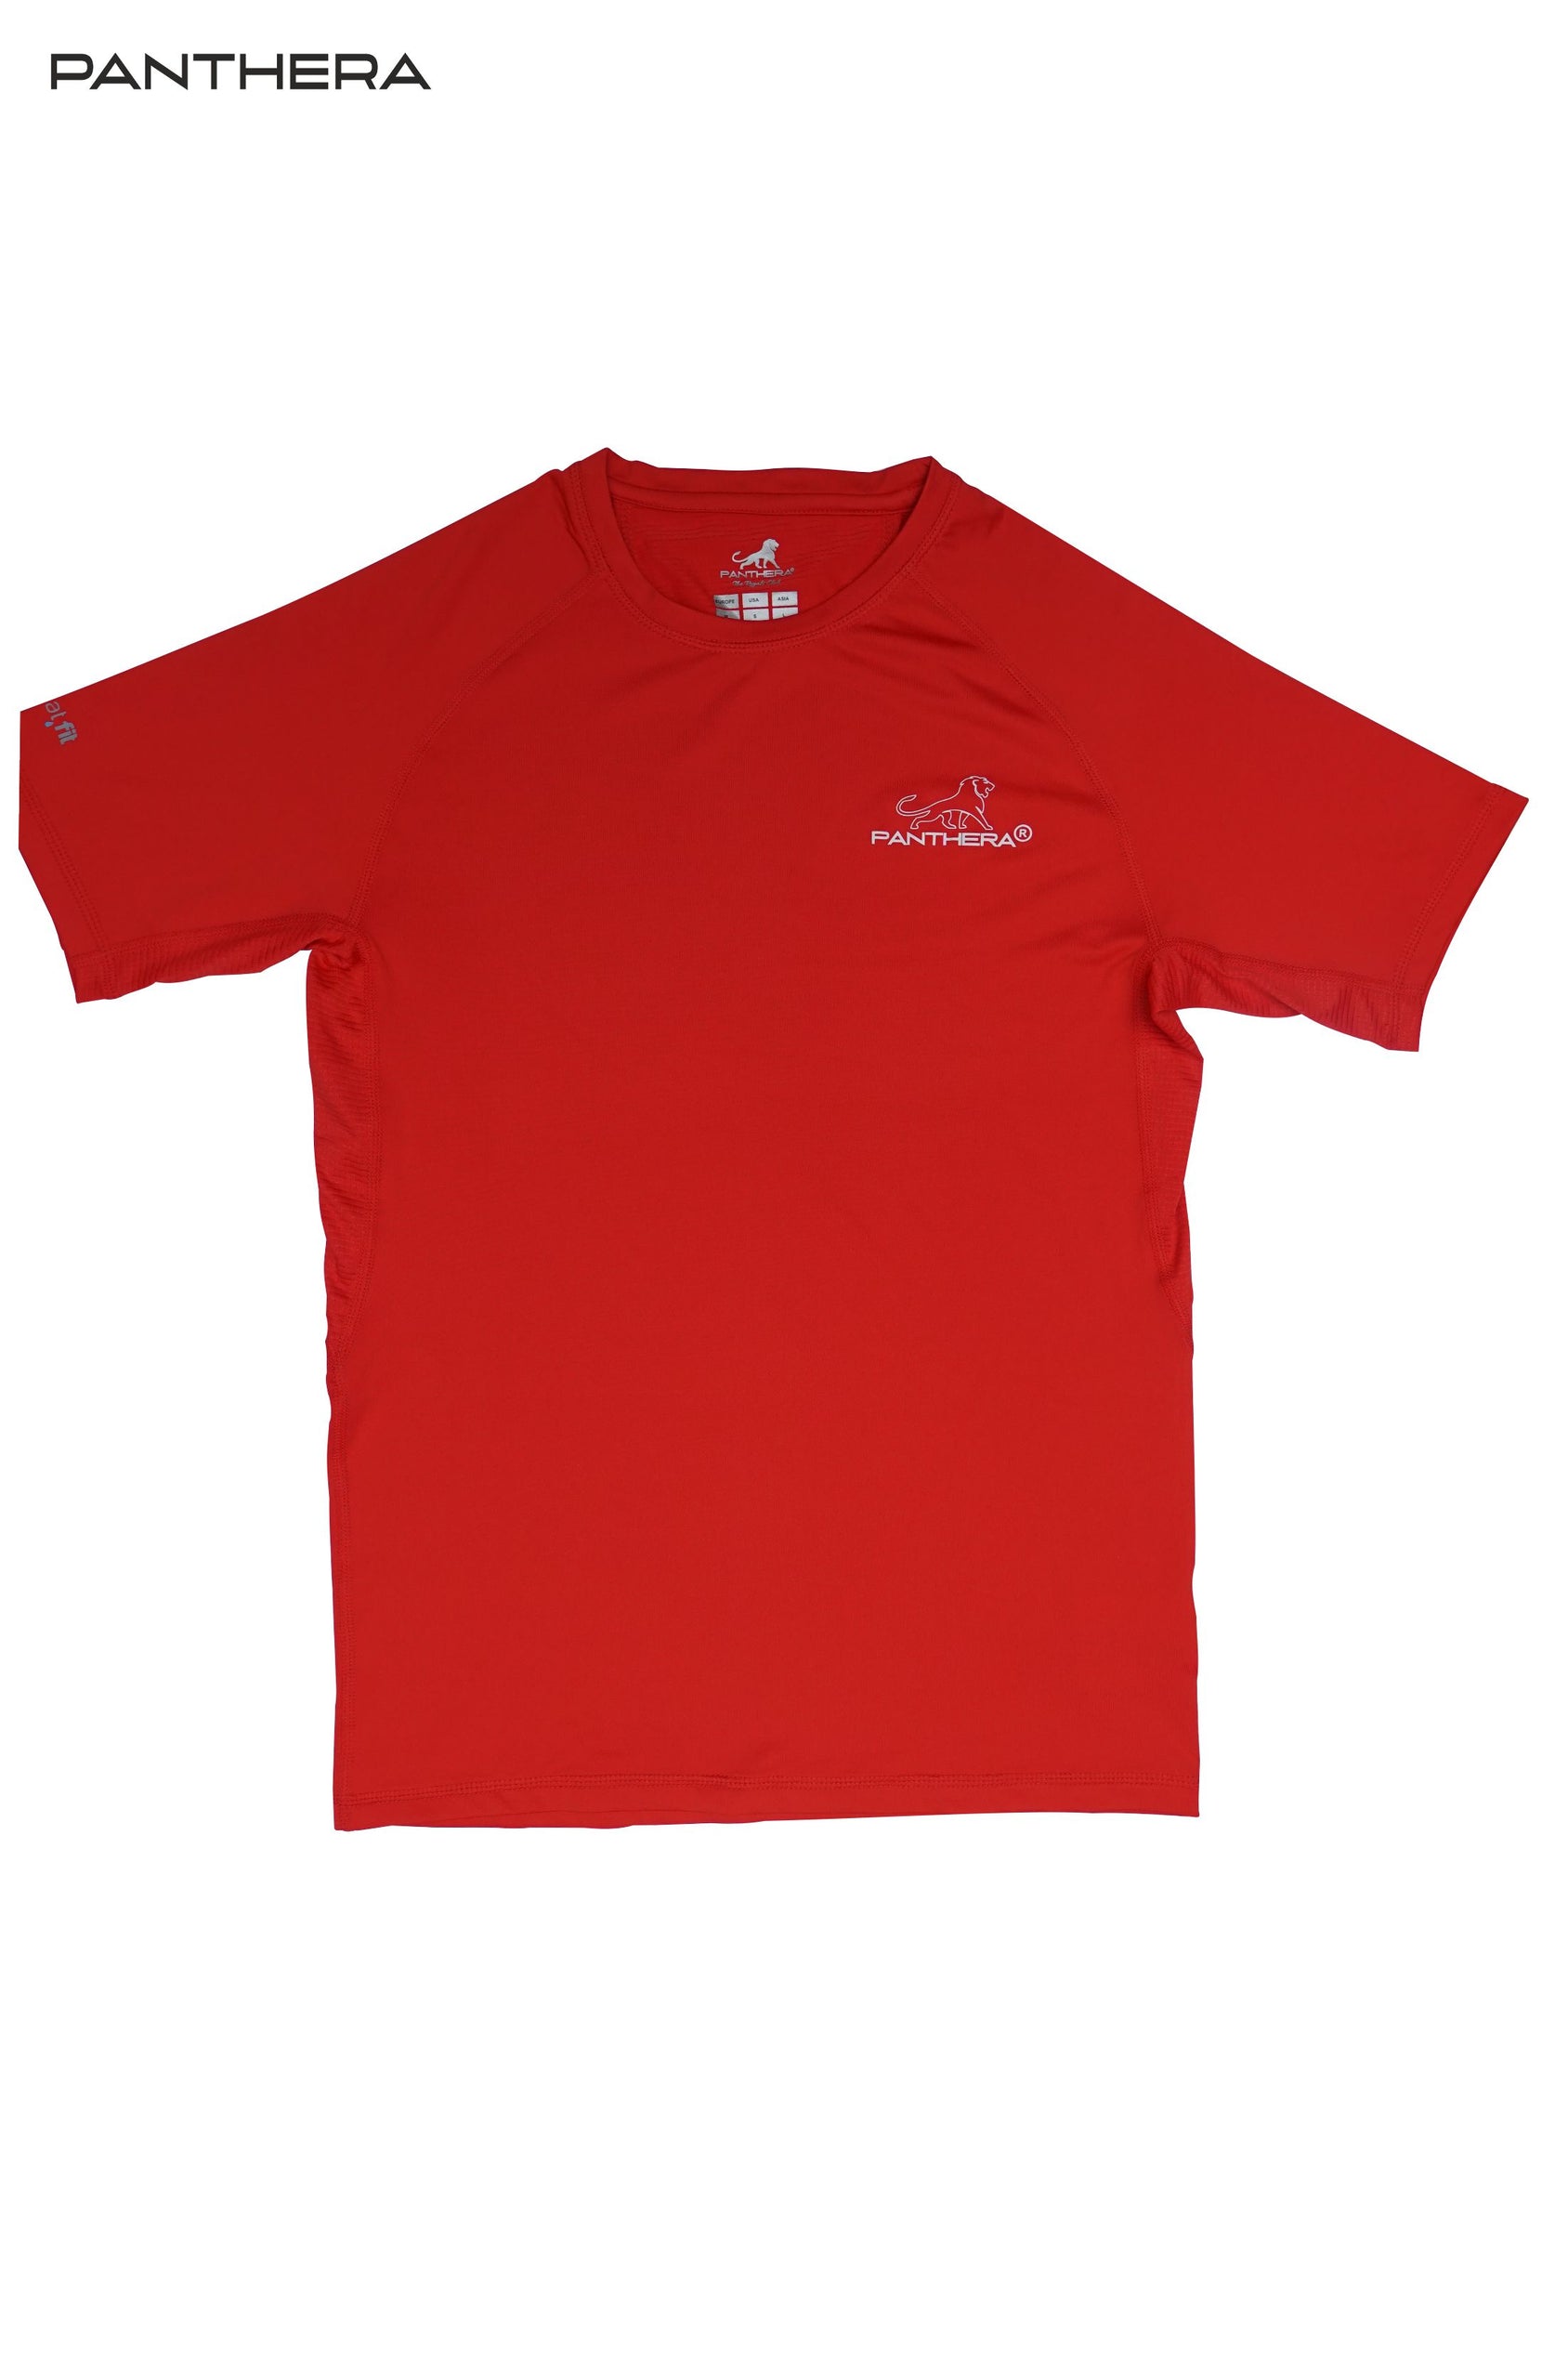 CLASSIC PERFORMANCE T-SHIRT (RED)